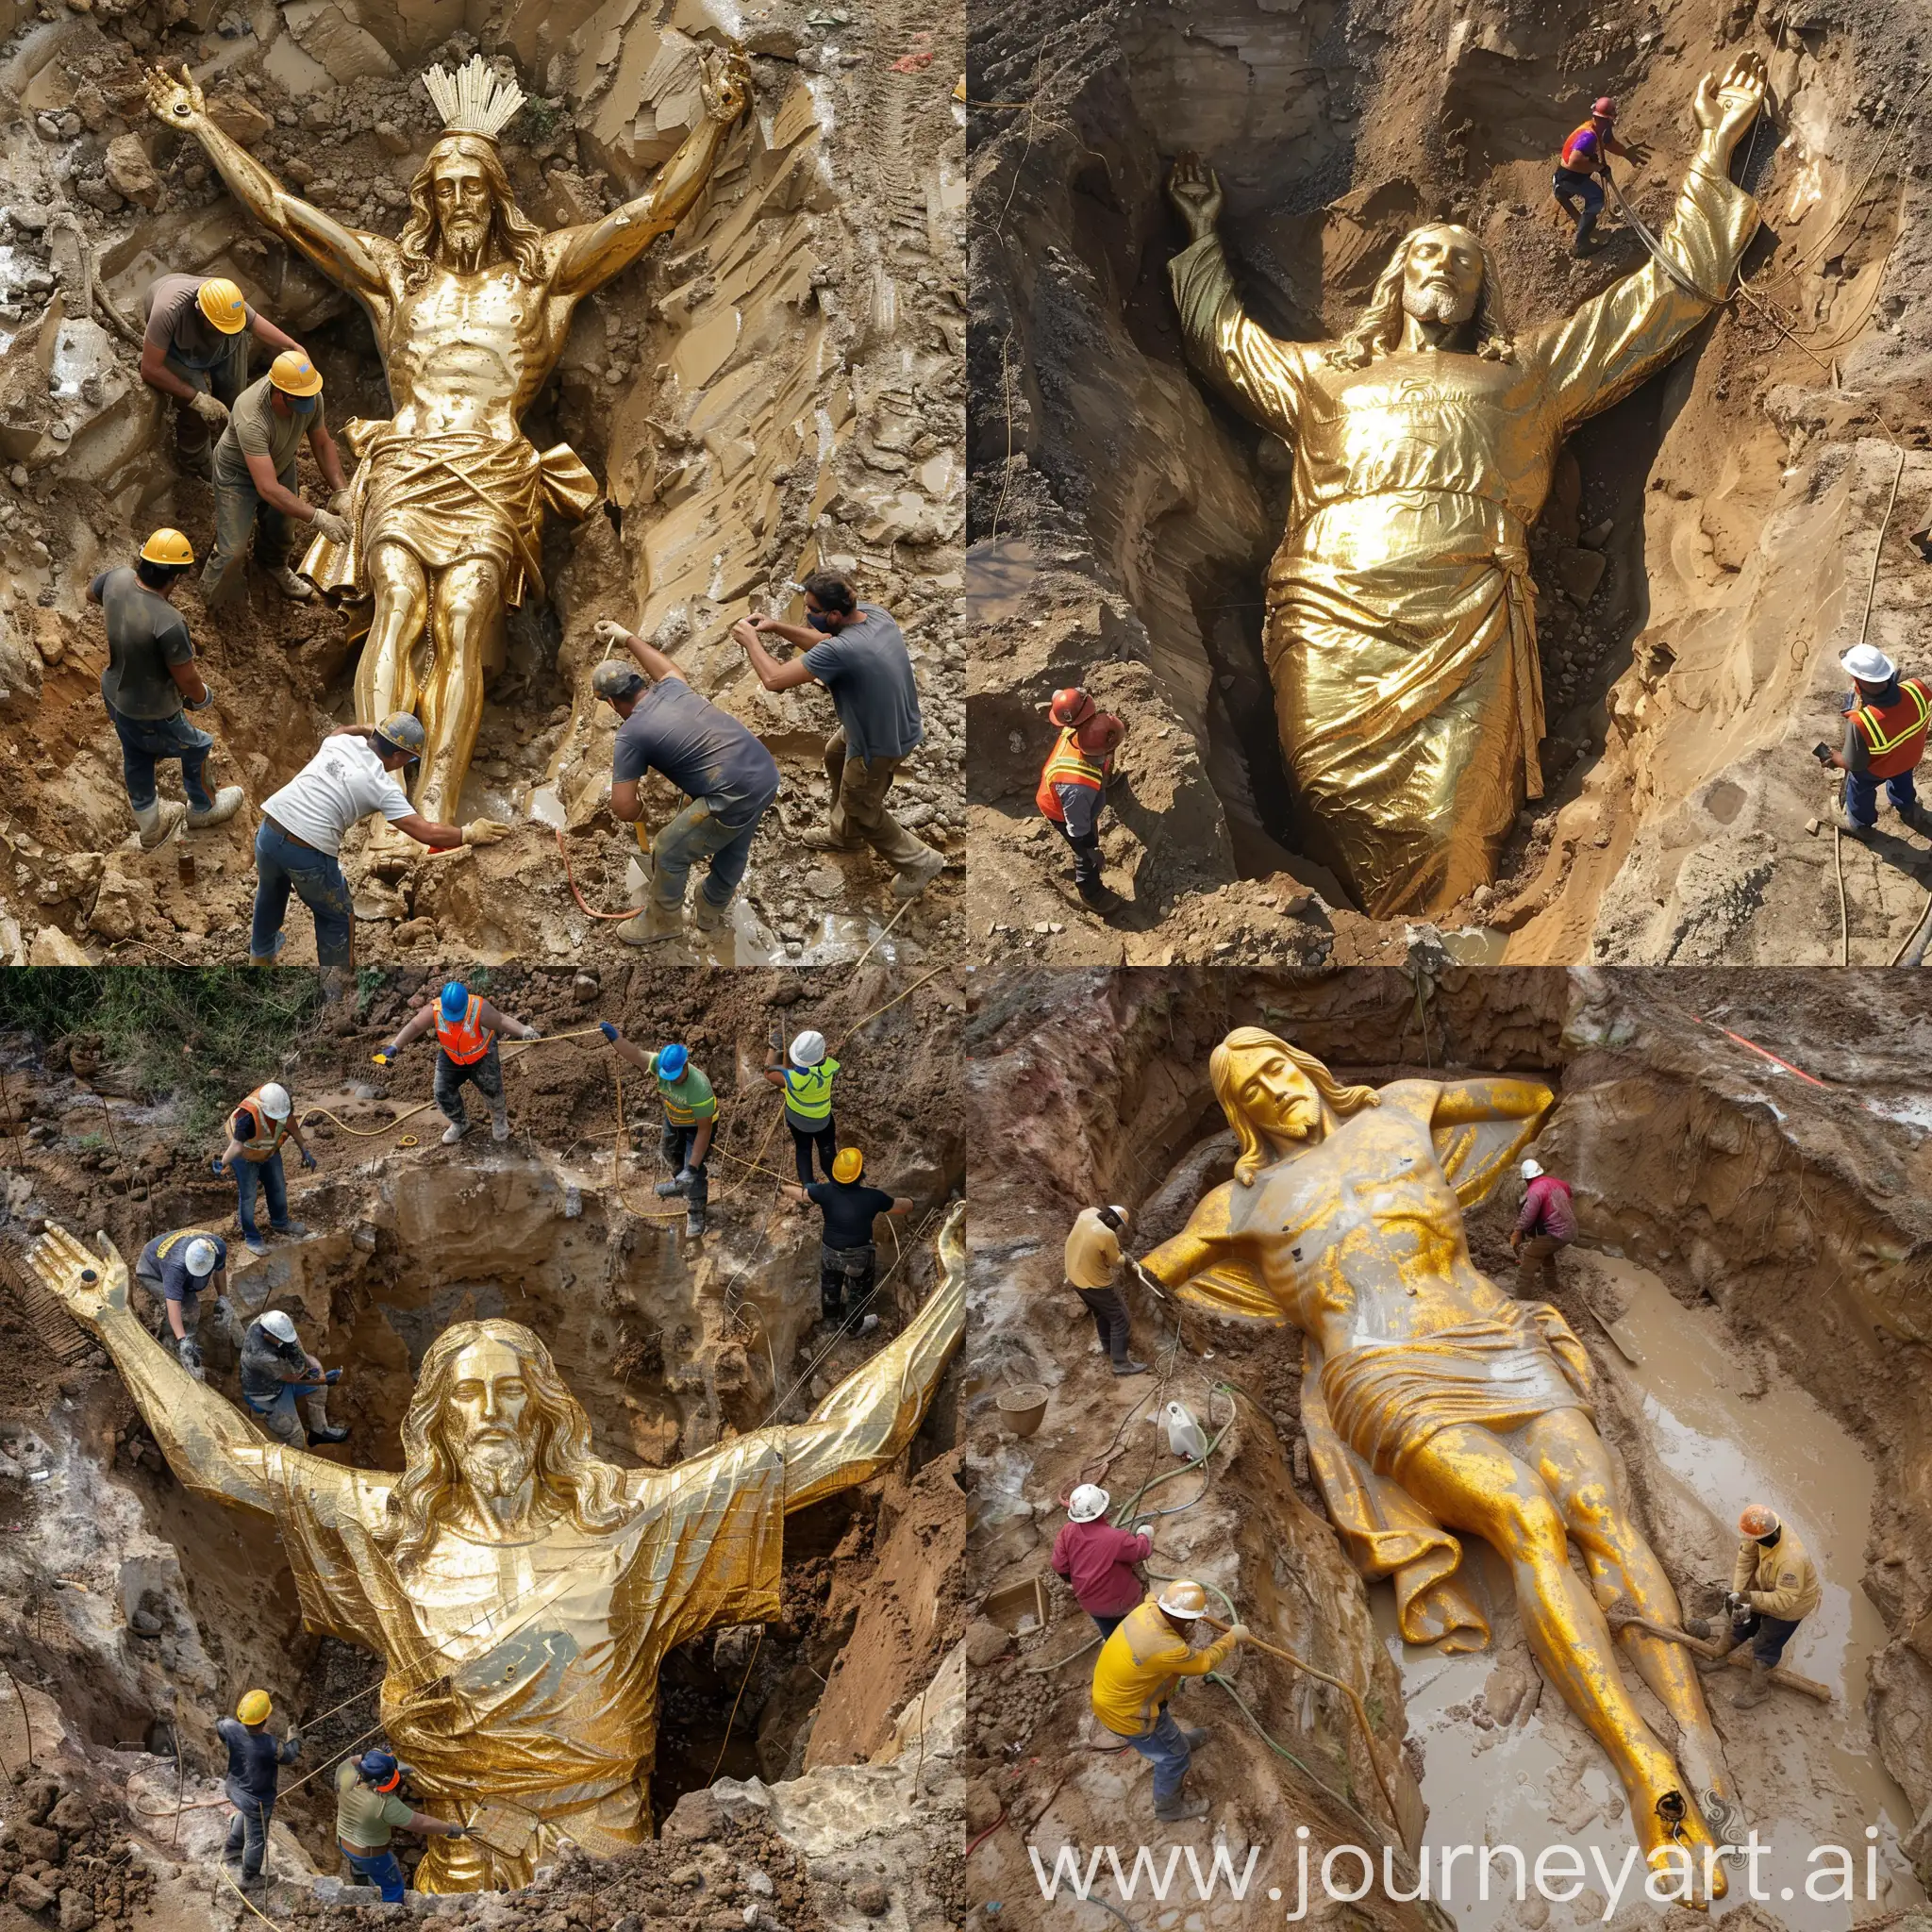 Workers digging out a massive Jesus golden statue 